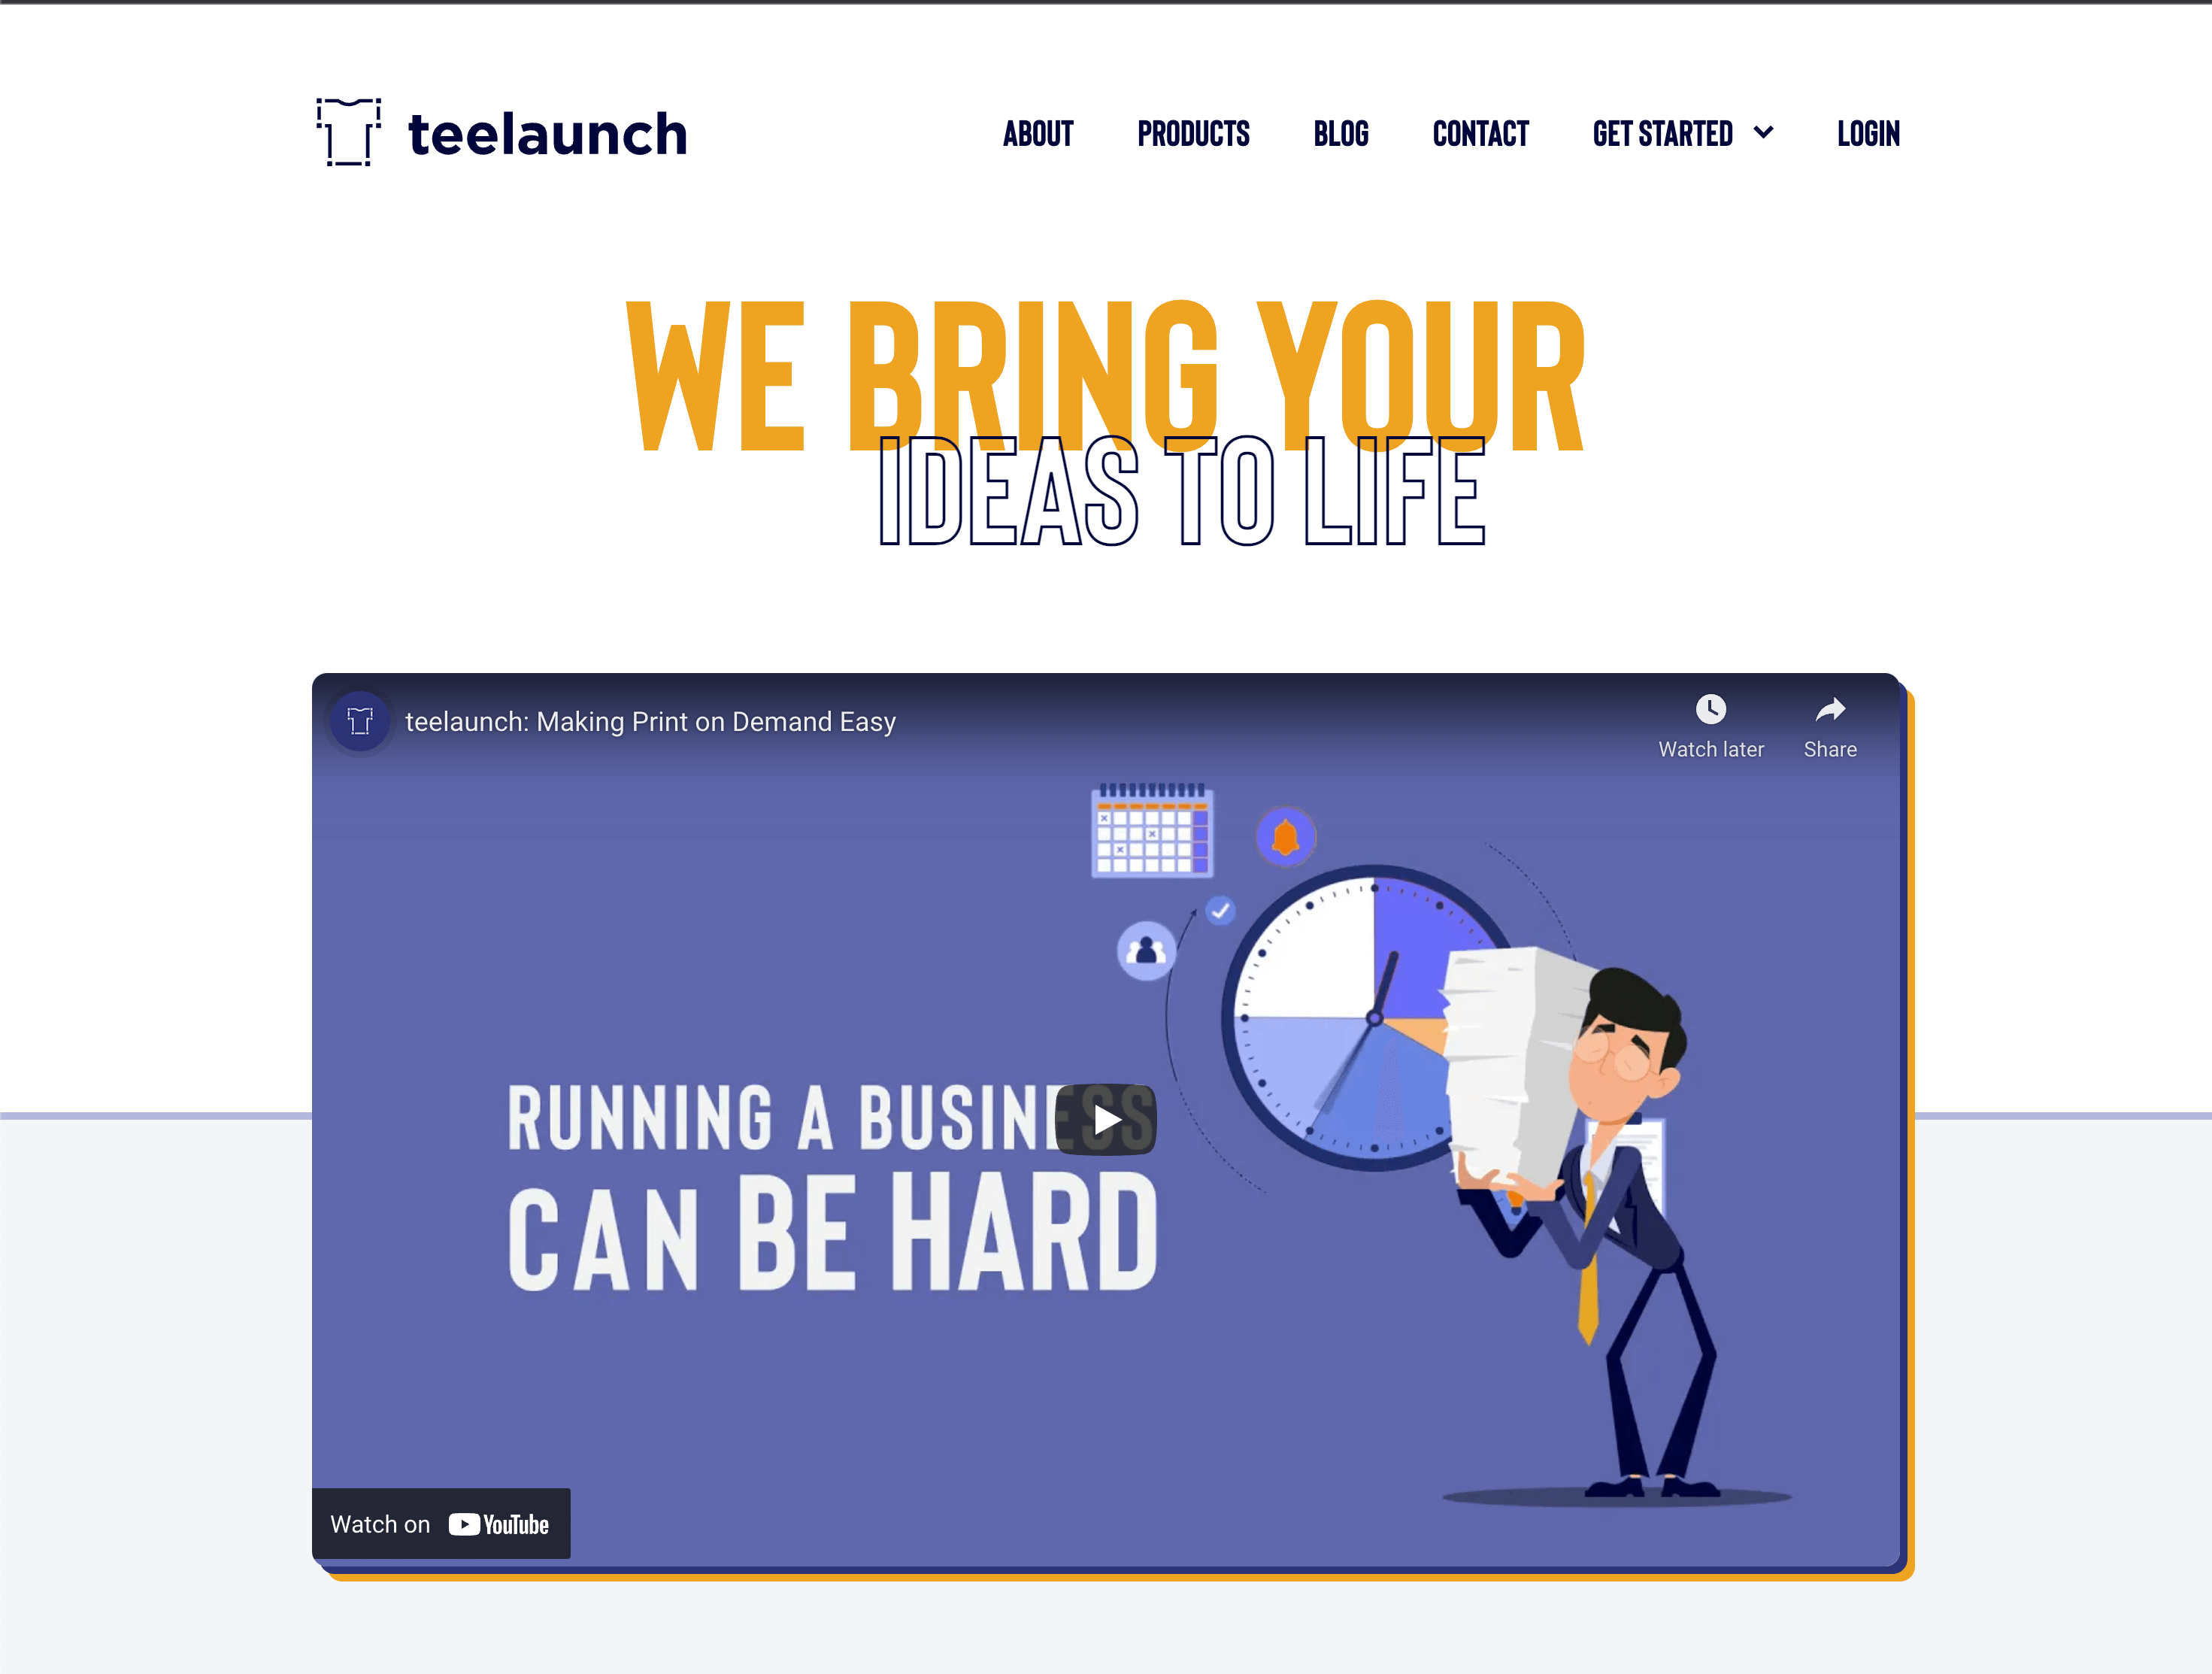 Teelaunch's home page